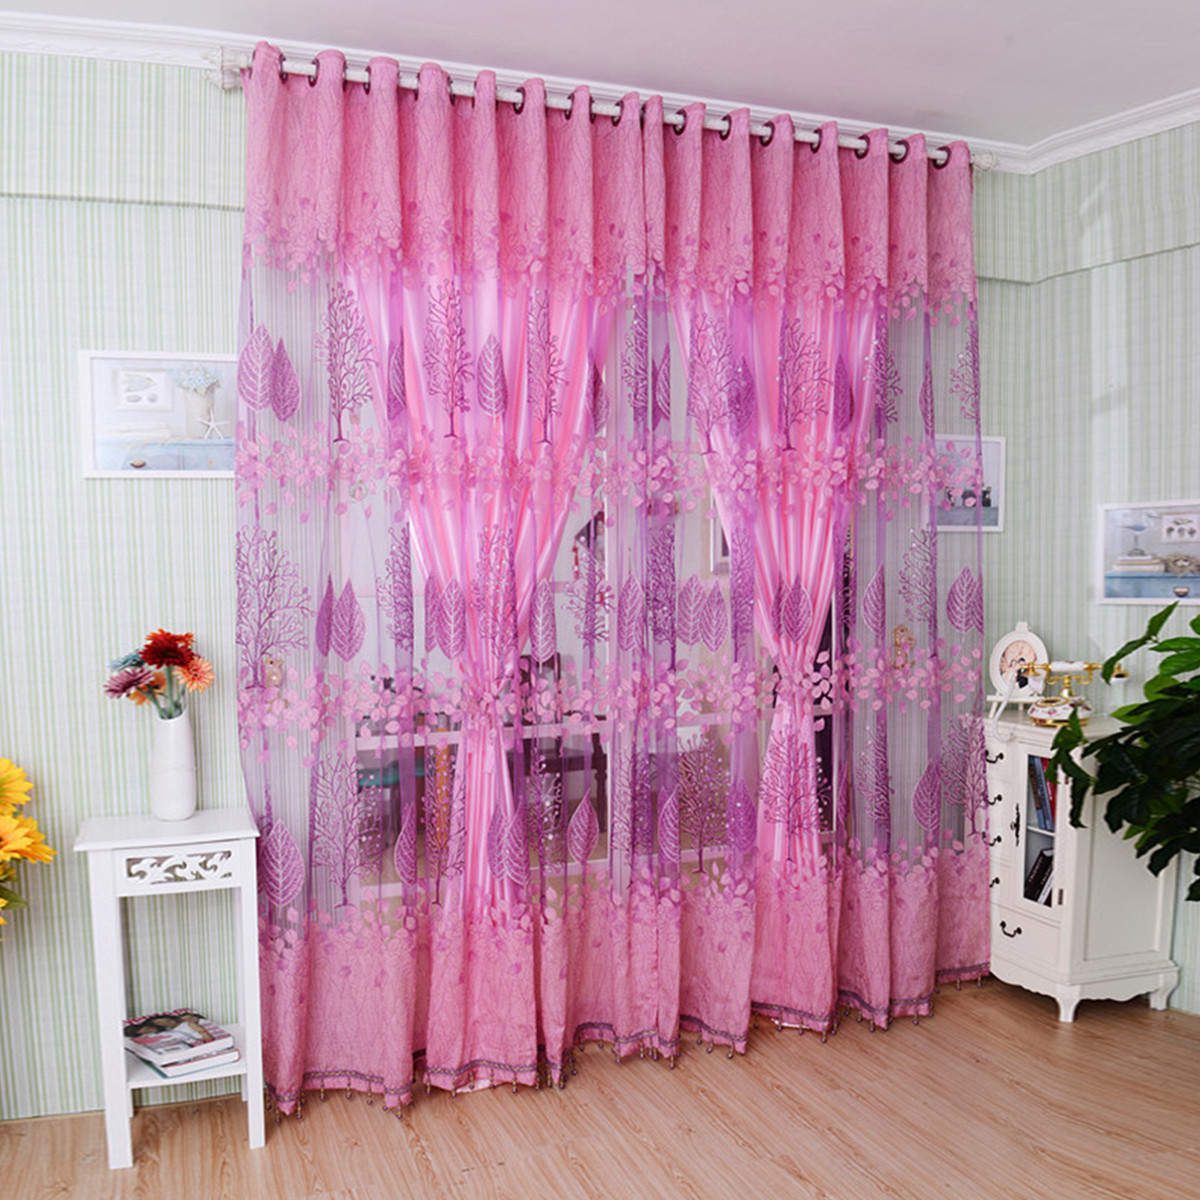 Ebay Curtains For Living Room
 US Floral Voile Window Curtain Blackout Tulle Curtain